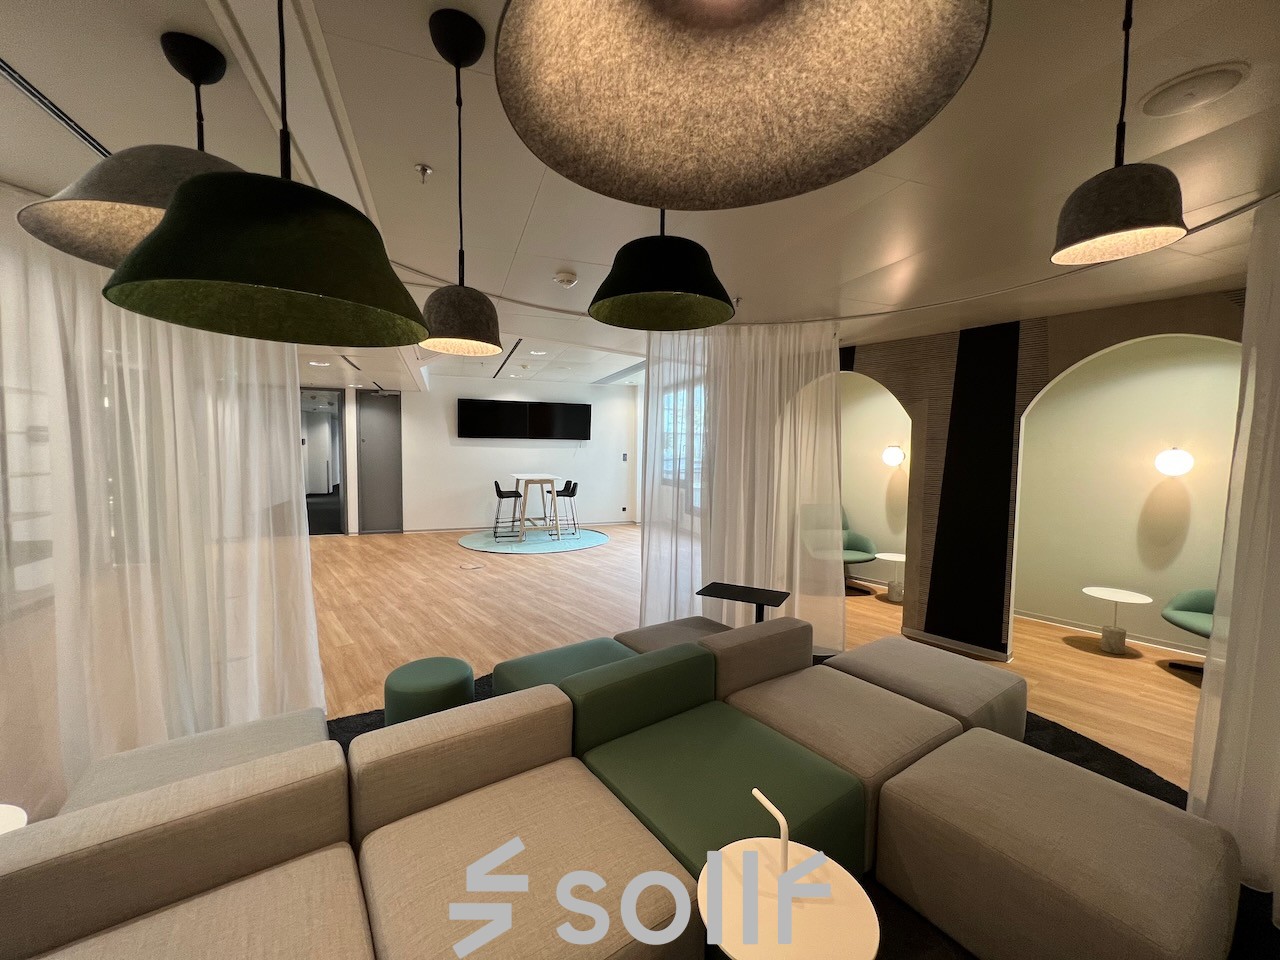 Modern office space rental at Am Euro Platz 2, 1120 Vienna Meidling, featuring a stylish lounge area with cozy seating and chic pendant lighting.